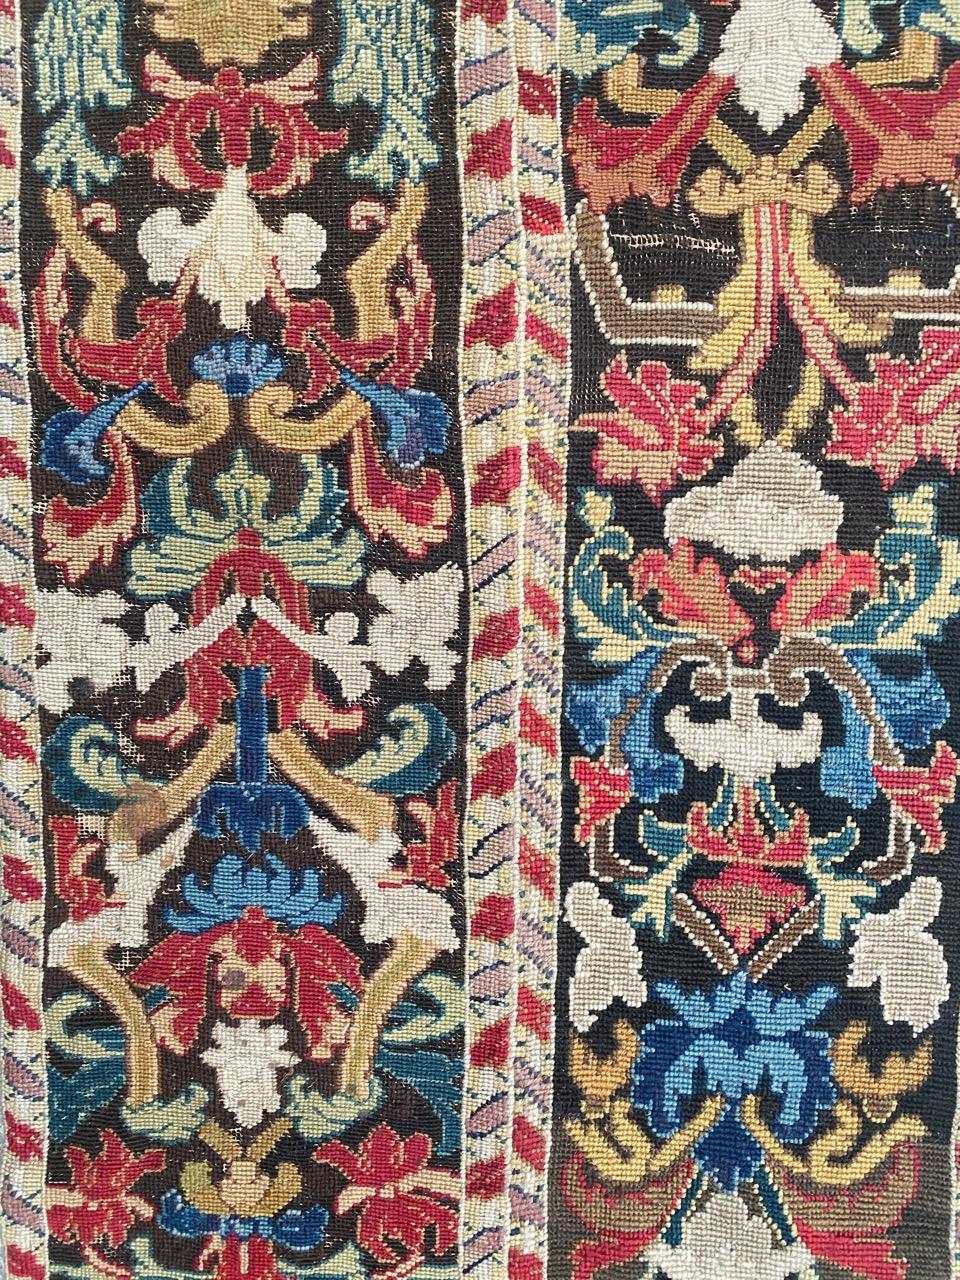 Beautiful needlepoint tapestry made up of two bands of 18th century tapestries with beautiful floral design and beautiful nice natural colors, entirely hand embroidered with needlepoint method with wool and silk.